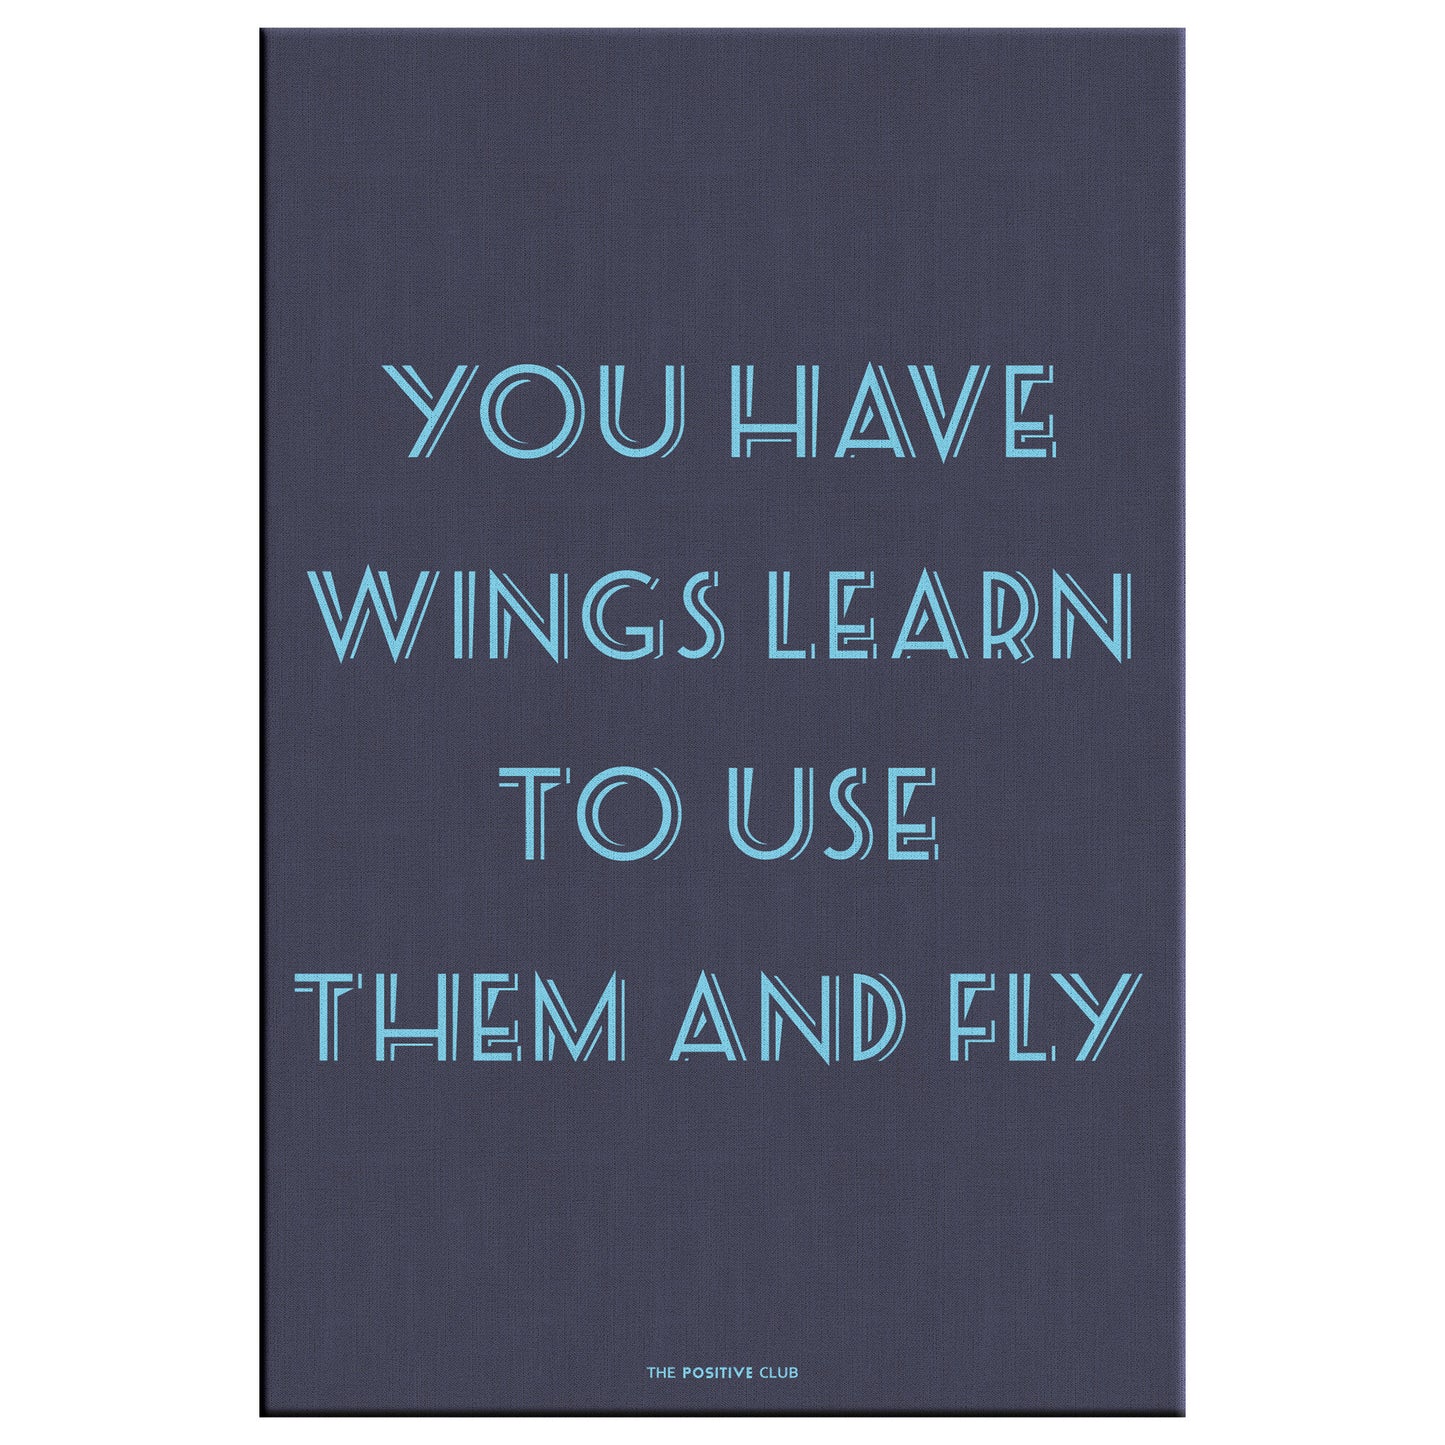 YOU HAVE WINGS LEARN TO USE THEM AND FLY